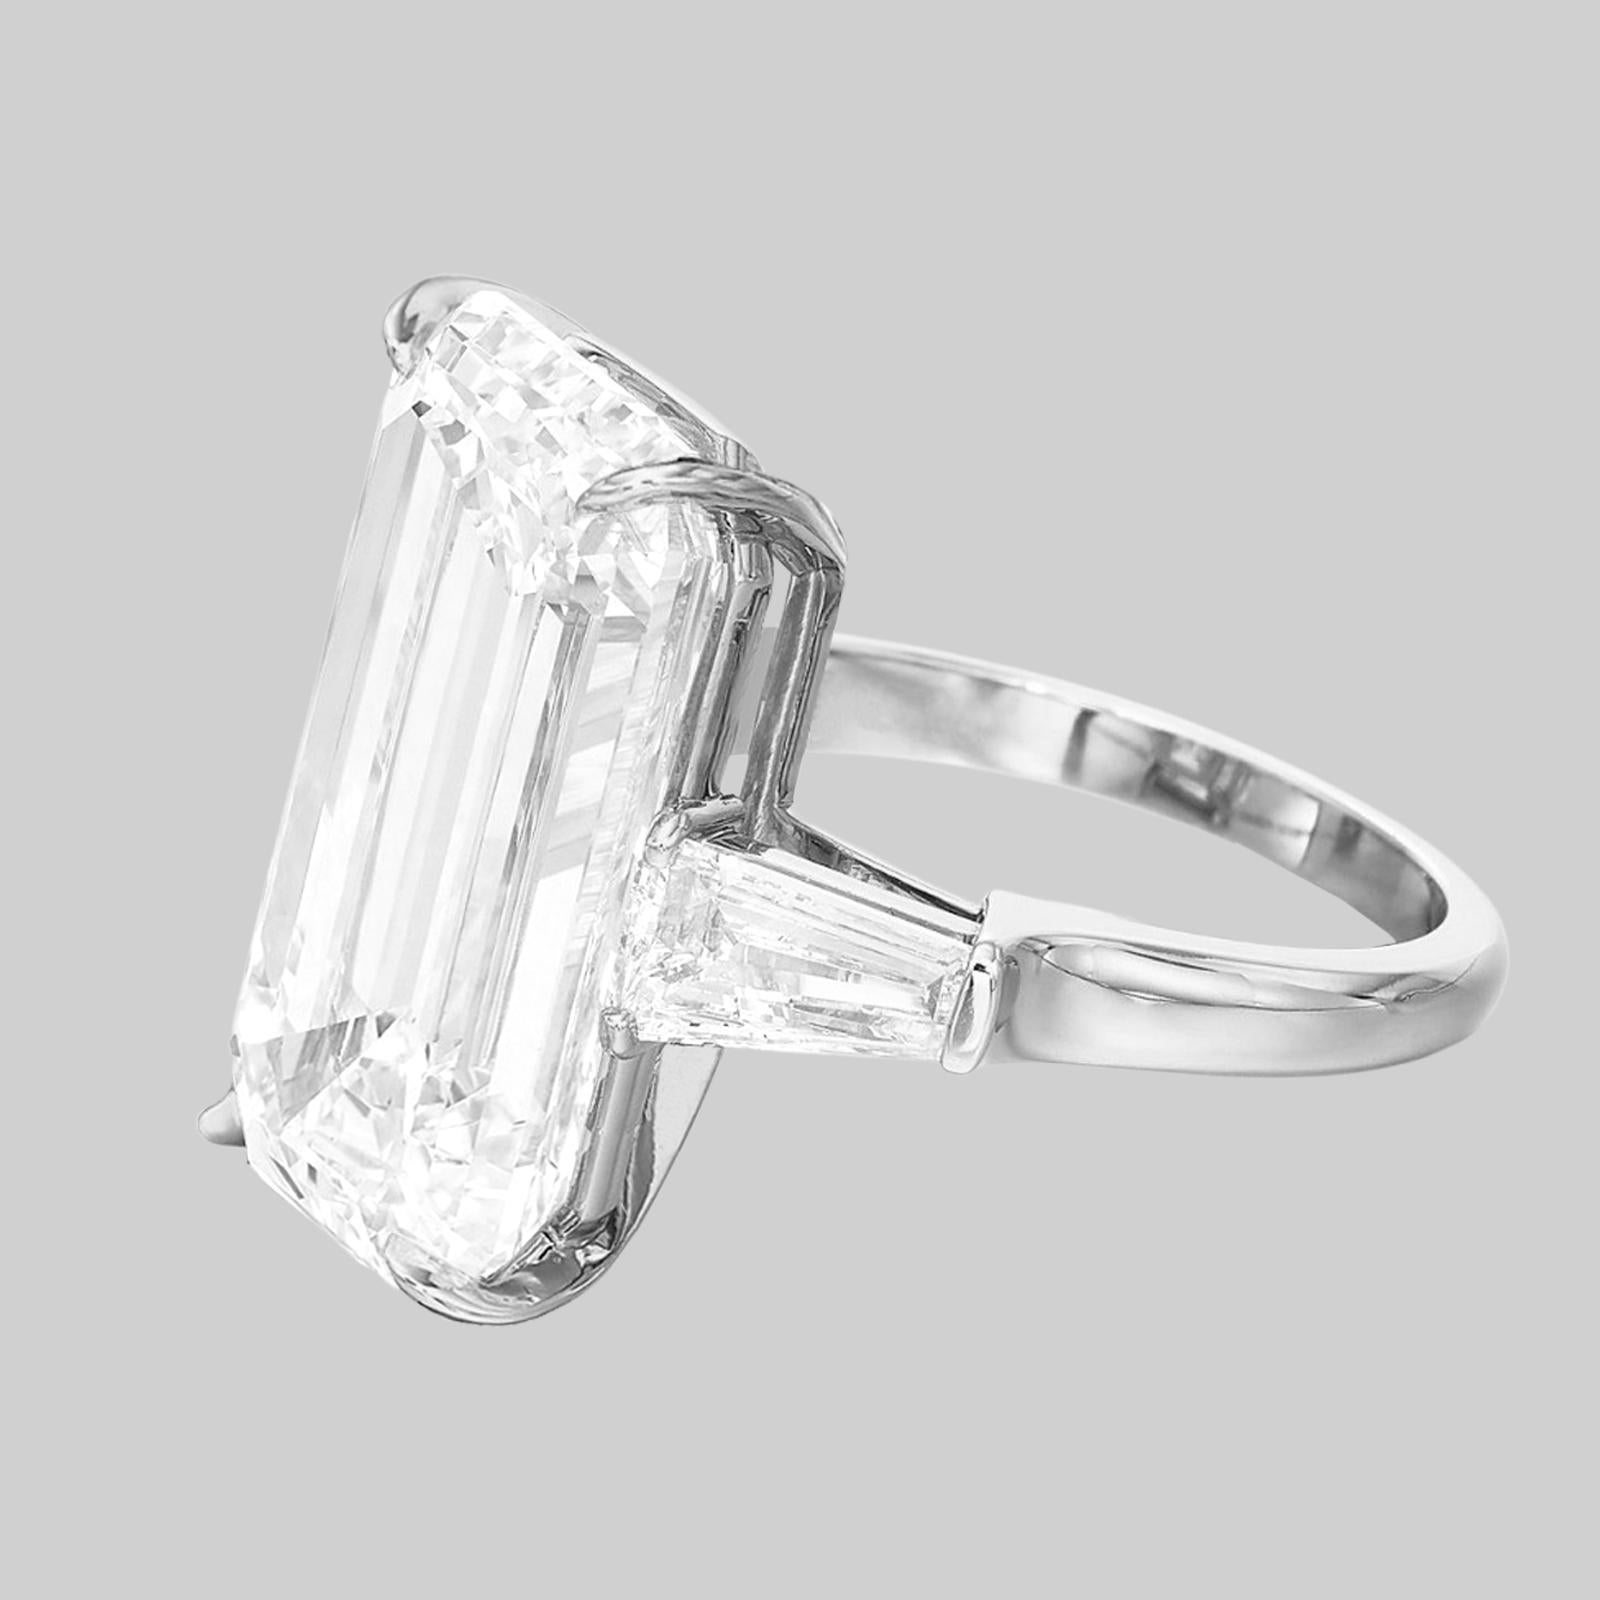 Golconda Type IIA 10.28 Carat D Color Emerald Cut Diamond Ring

Experience the pinnacle of luxury with our extraordinary Golconda Type IIA diamond ring, showcasing a magnificent 10.28 carat D color emerald cut diamond. Renowned for their exceptional